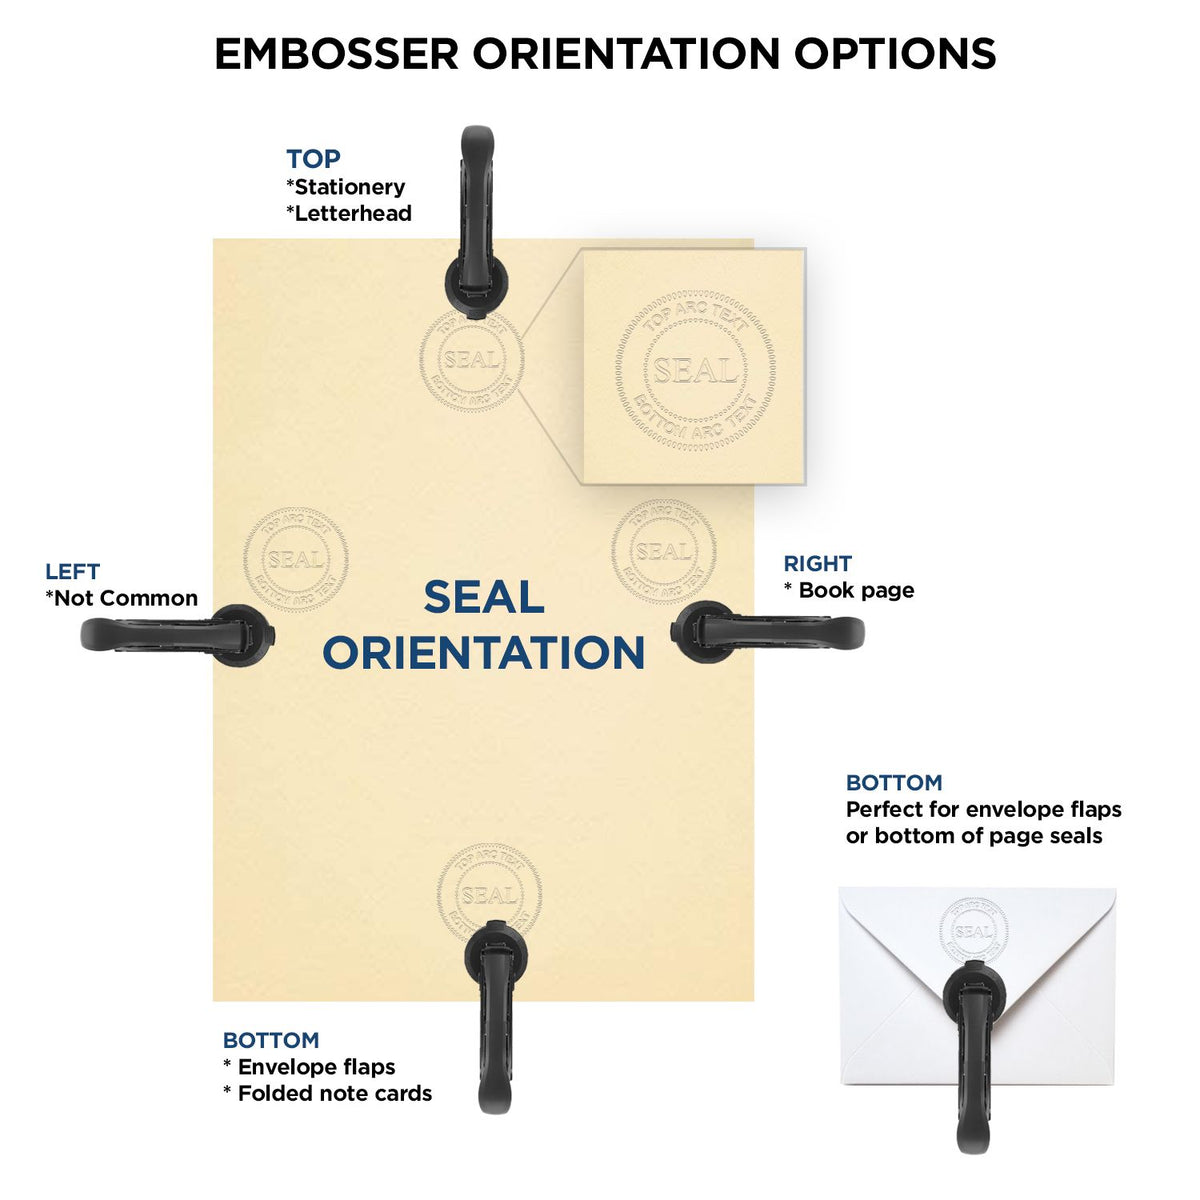 An infographic for the Alaska Geologist Desk Seal showing embosser orientation, this is showing examples of a top, bottom, right and left insert.